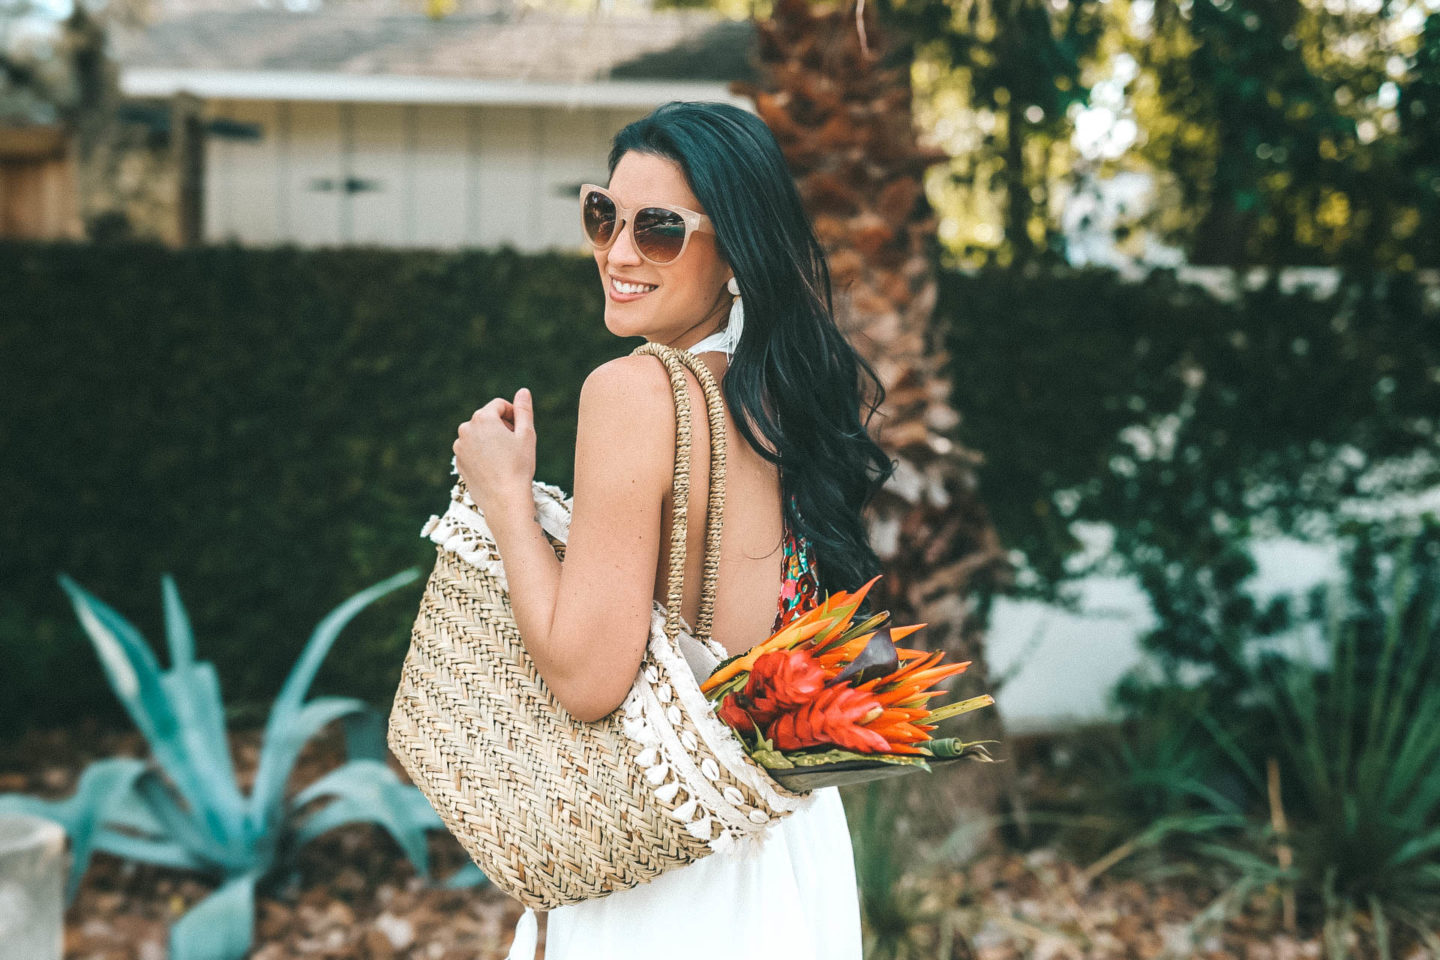 DTKAustin shares her favorite vacation maxi dress and swim coverup from Show Me Your Mumu that is 50% off on sale. Straw bag is from Express and the bouquet is from The Bouqs.